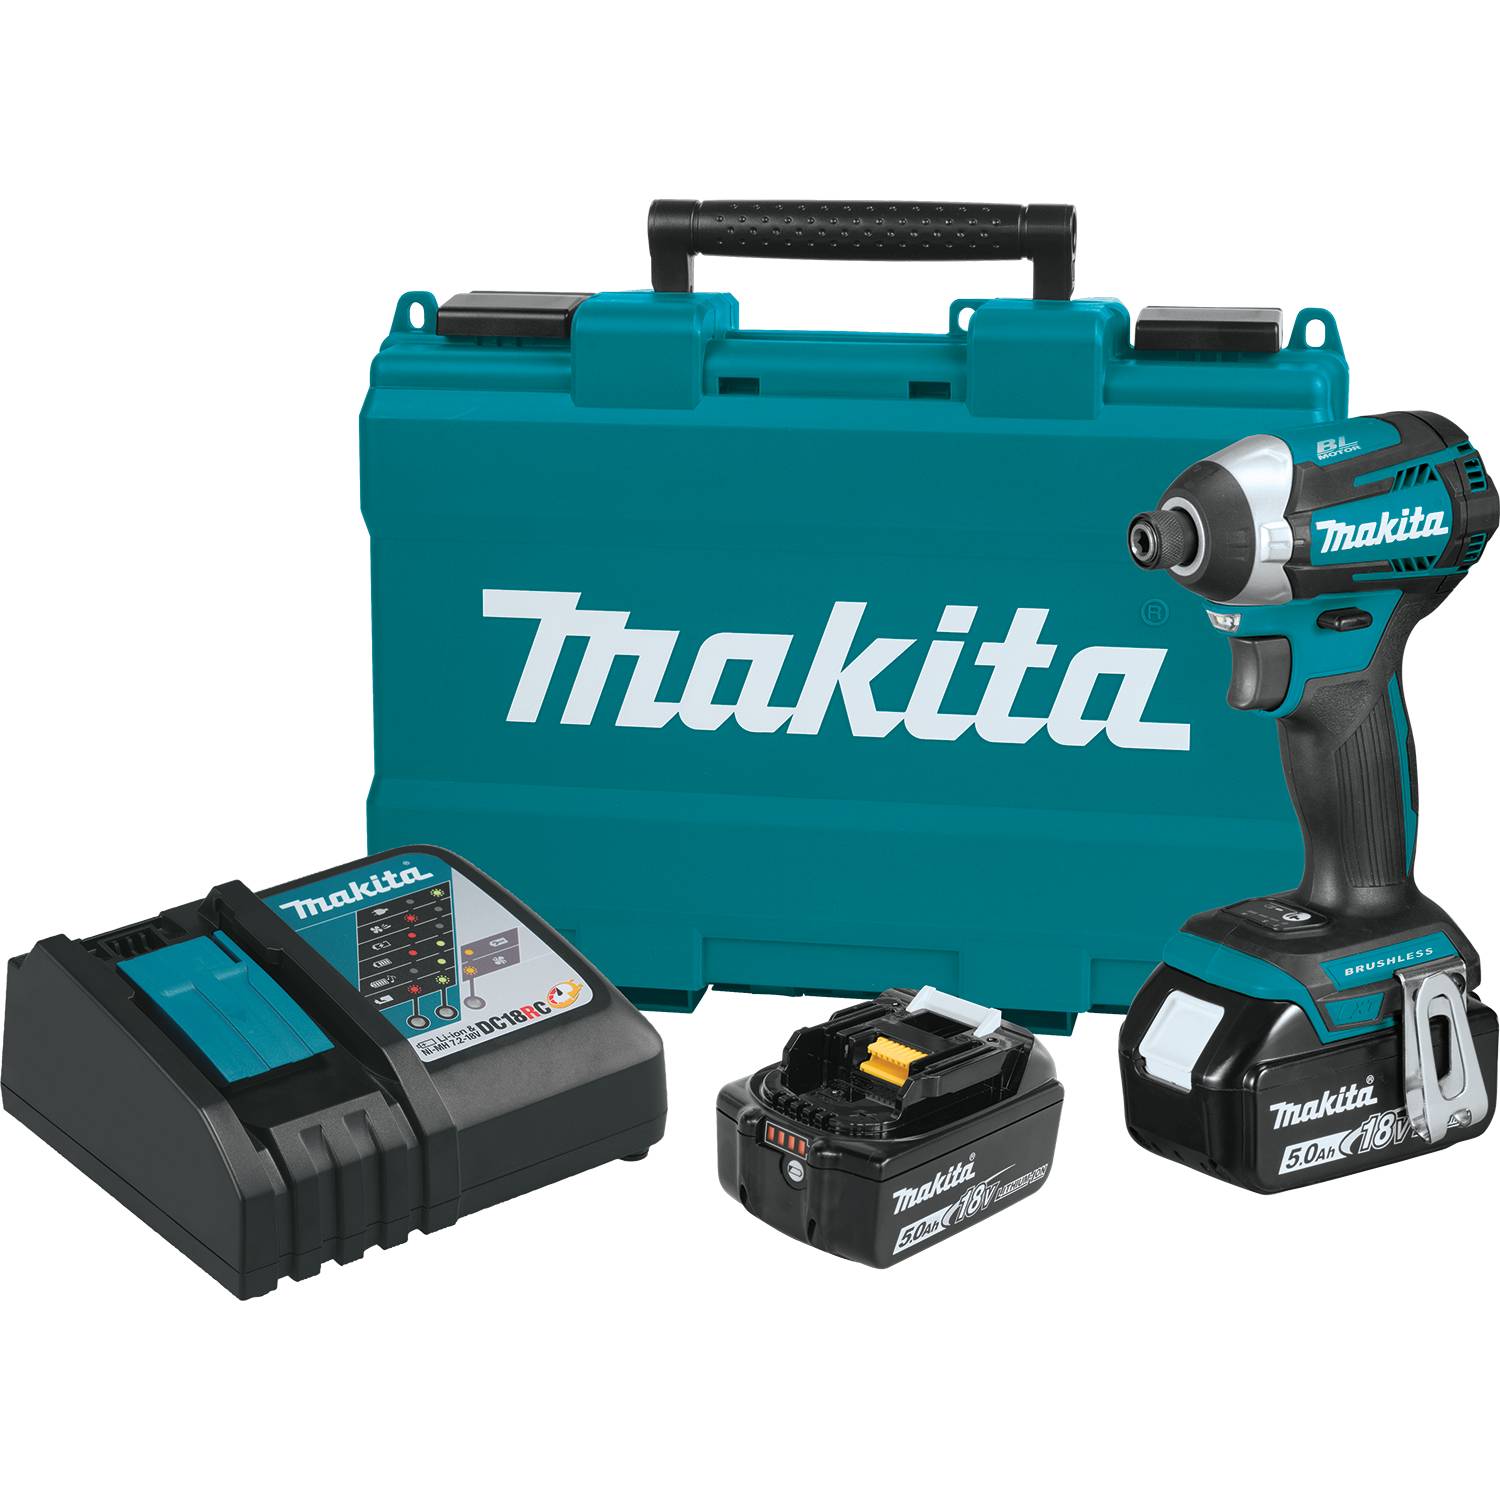 Makita 18V LXT Brushless Cordless Quick-Shift Mode 3-Speed Impact Driver Kit from GME Supply